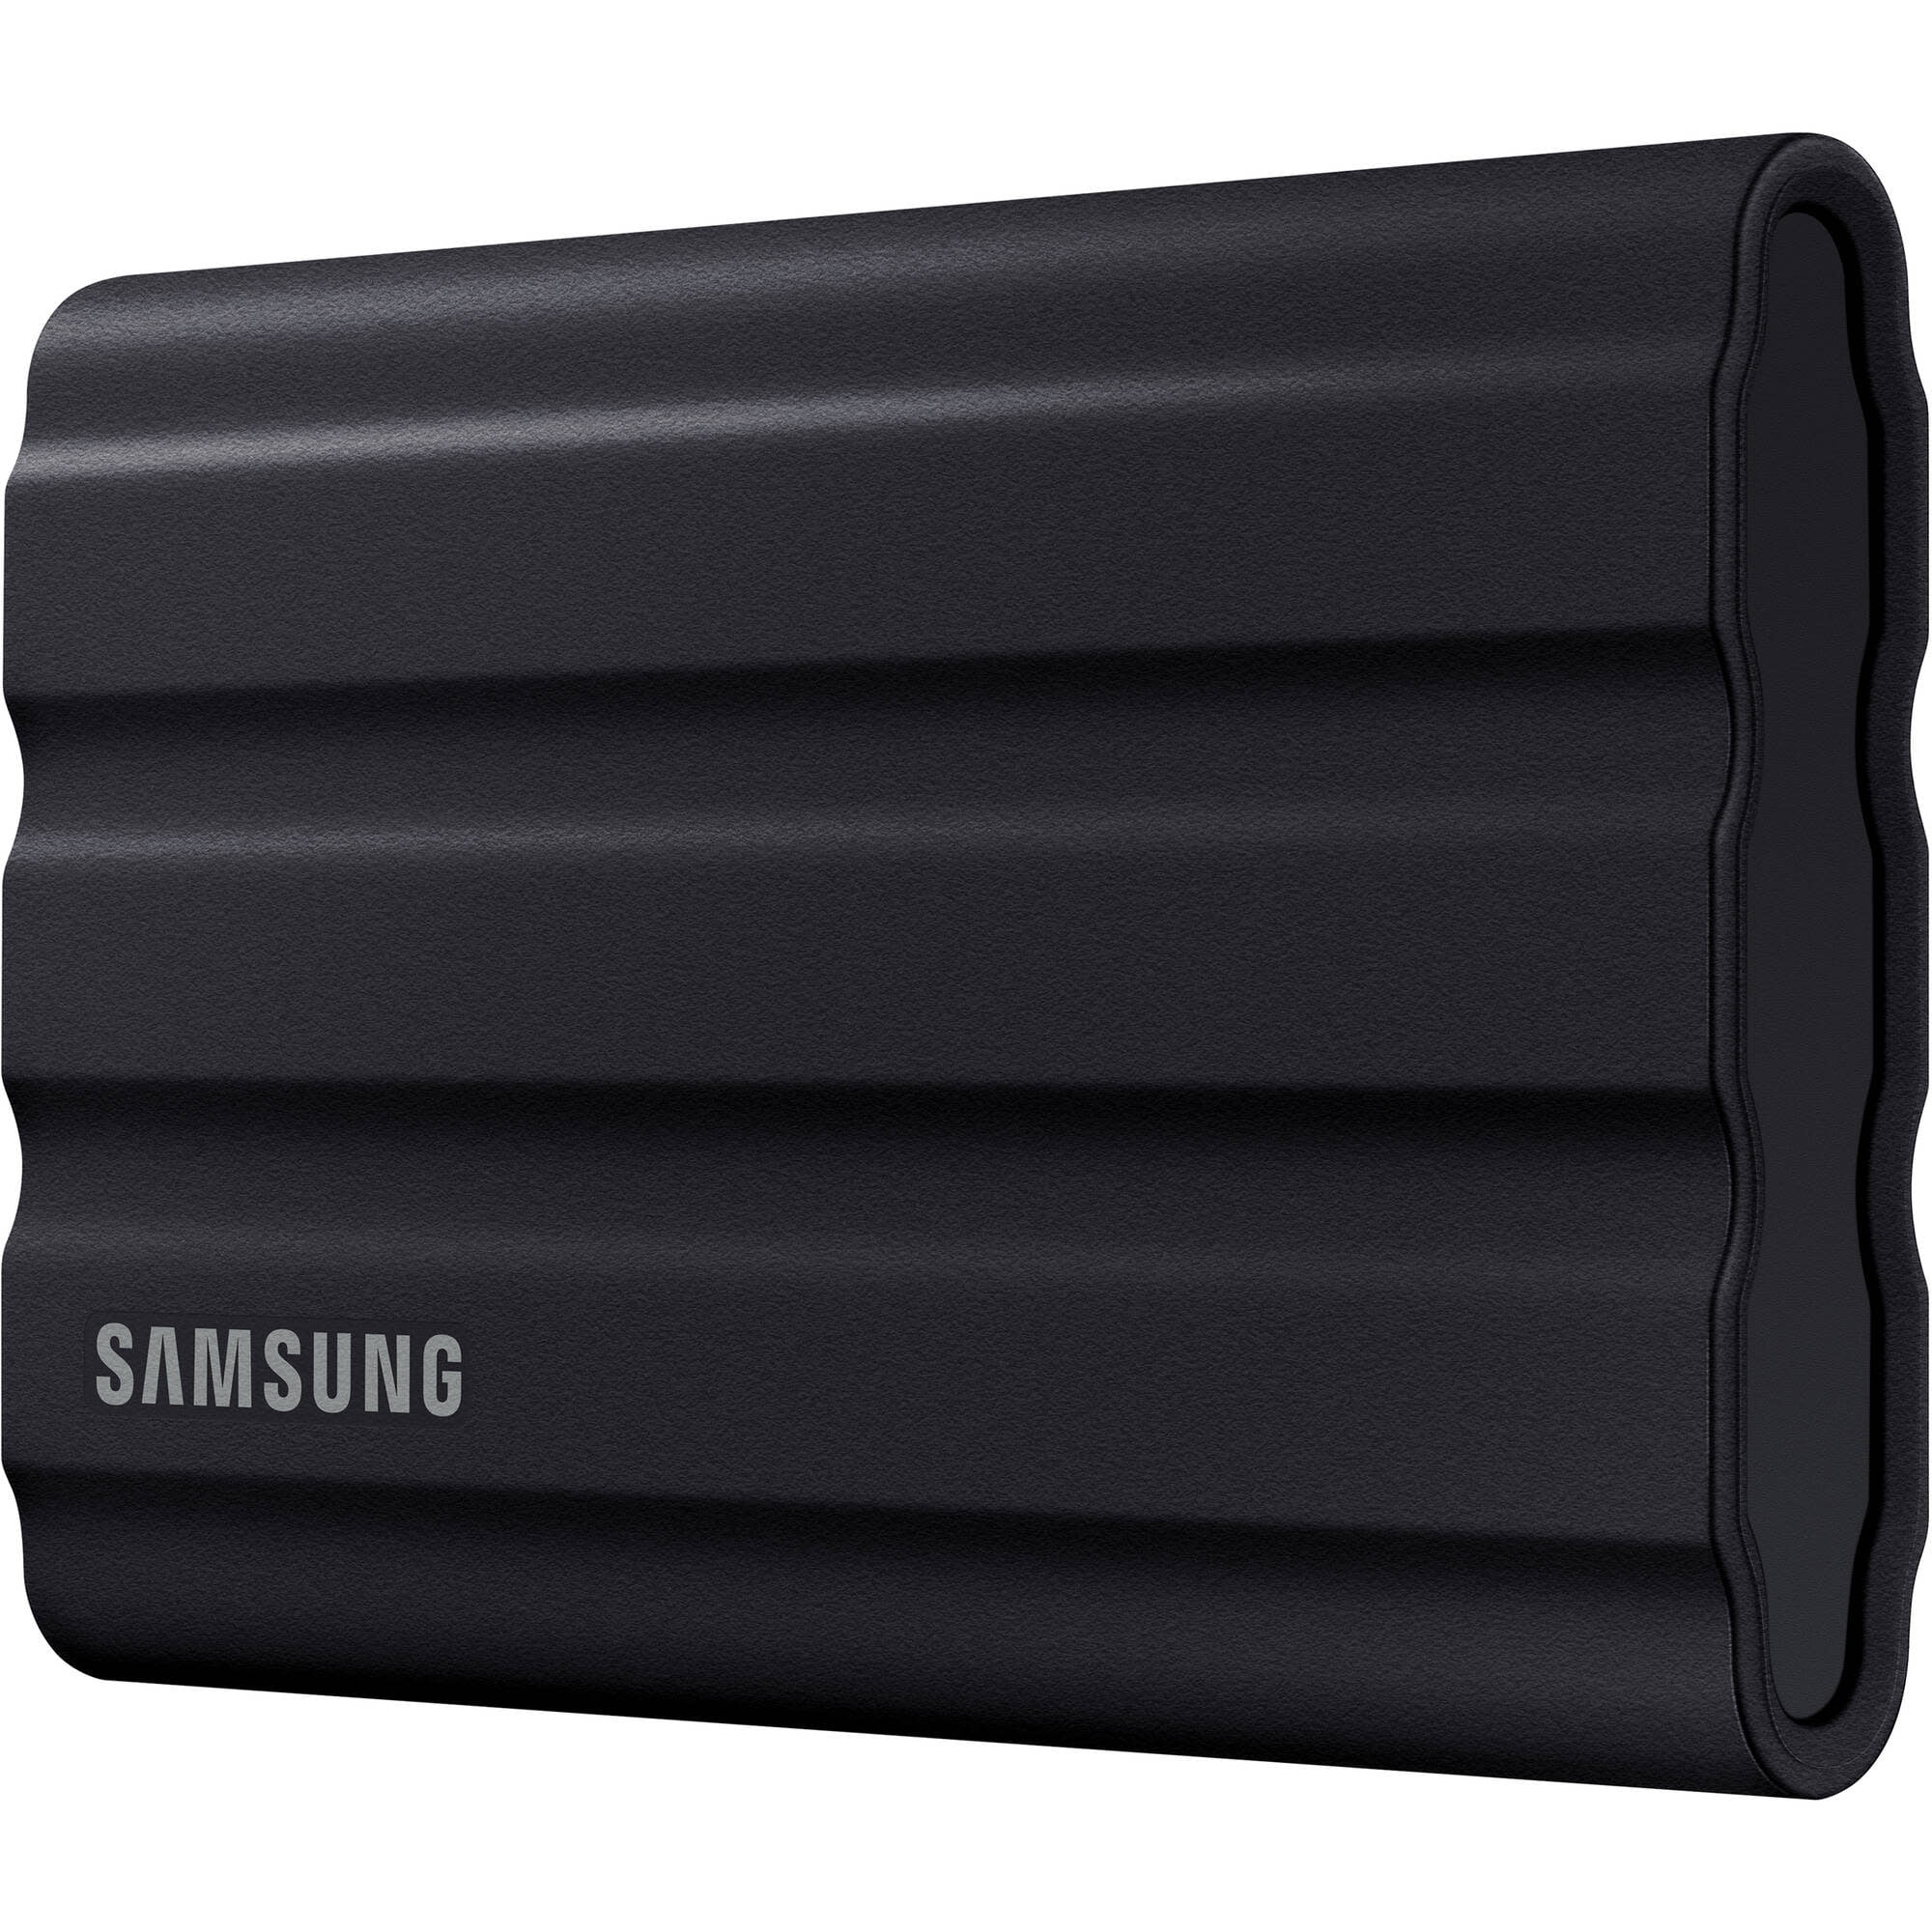 SSD externe Samsung PACK SSD T7 1TO + CARTE MICRO SD 64GO EVO PLUS - PACK  SSD T71T MSD 64